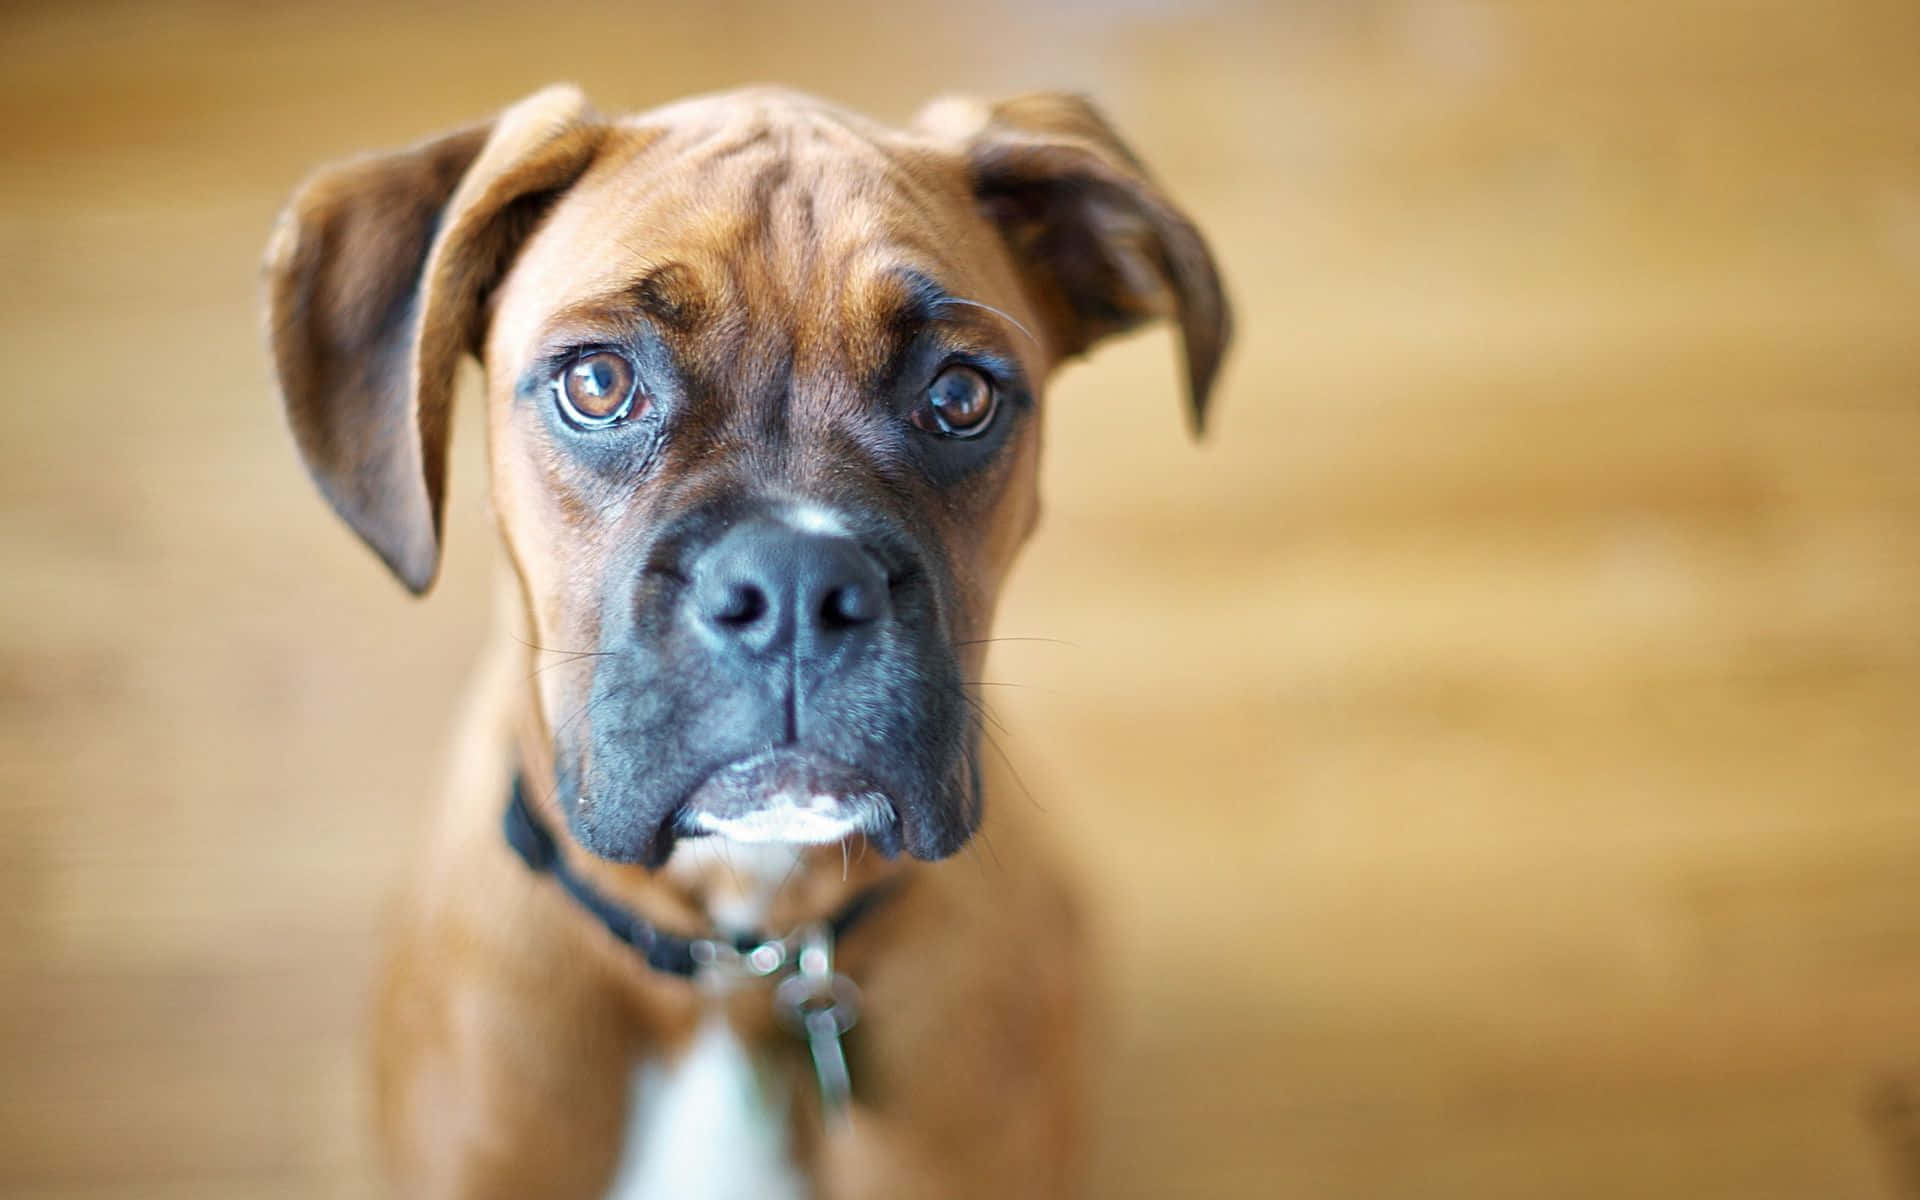 This Boxer Dog is showing off its goofy and friendly nature.